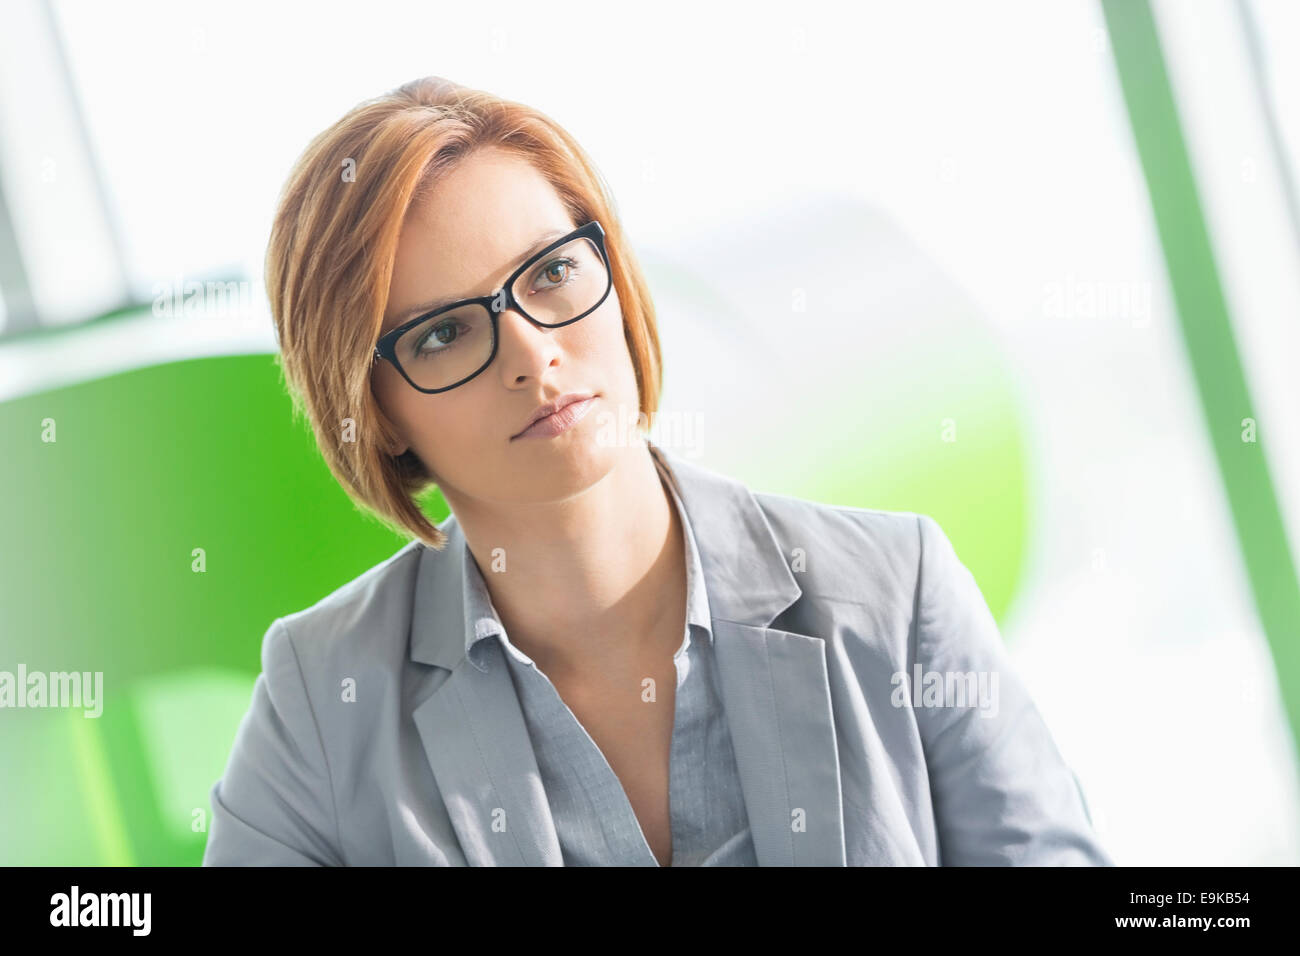 Young businesswoman looking away in office Stock Photo